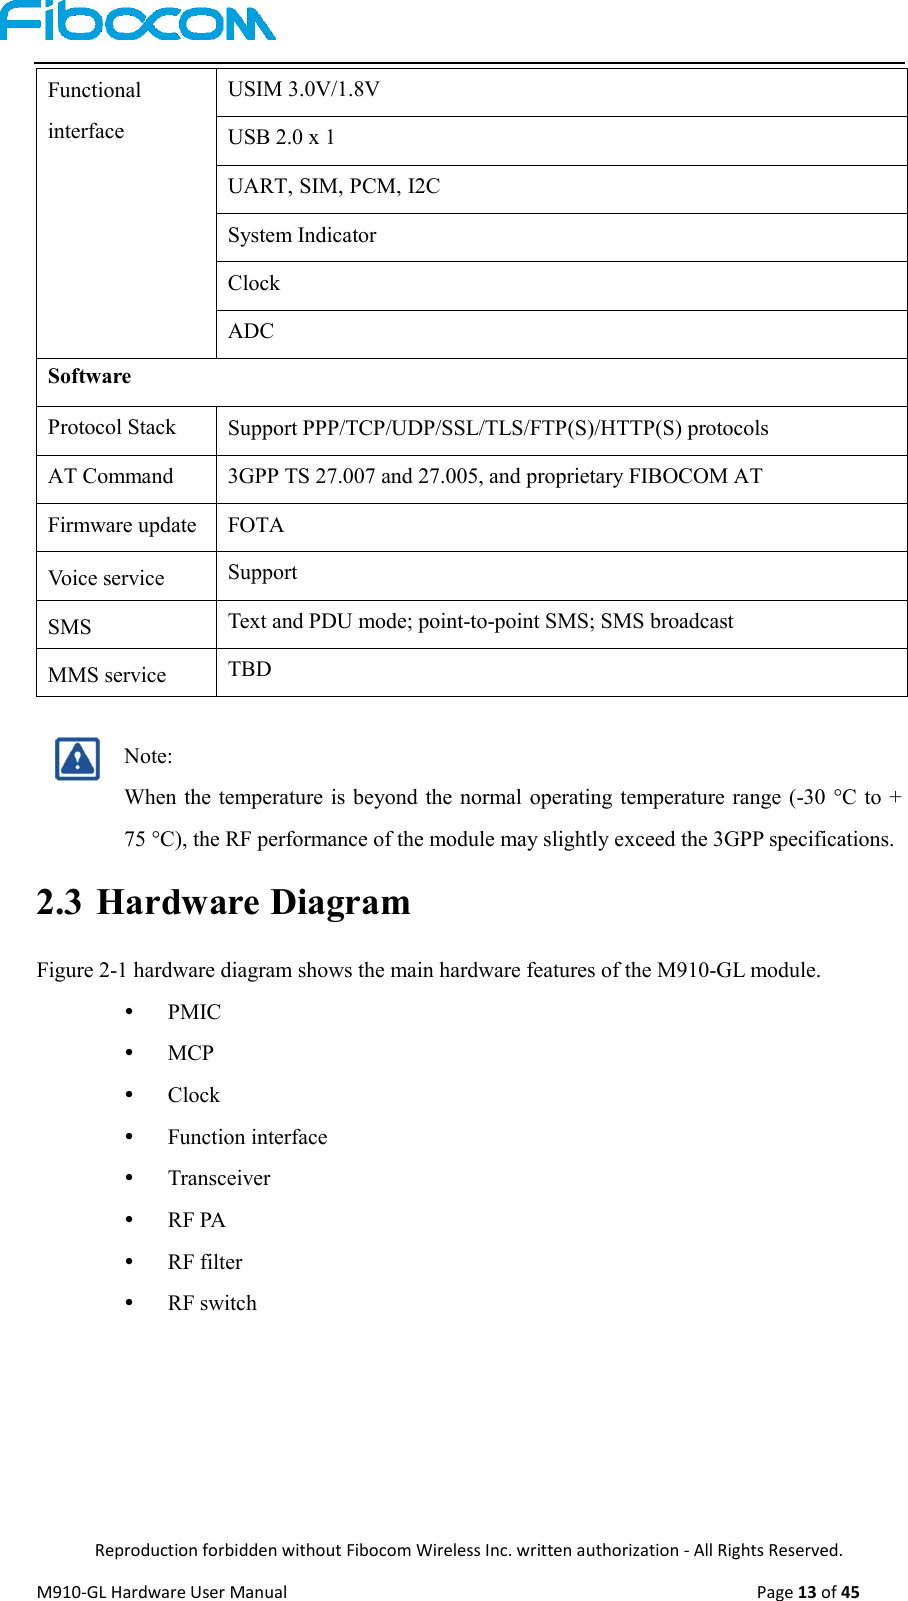  Reproduction forbidden without Fibocom Wireless Inc. written authorization - All Rights Reserved. M910-GL Hardware User Manual                                                                                                  Page 13 of 45  Functional interface USIM 3.0V/1.8V USB 2.0 x 1 UART, SIM, PCM, I2C System Indicator Clock   ADC Software Protocol Stack Support PPP/TCP/UDP/SSL/TLS/FTP(S)/HTTP(S) protocols AT Command 3GPP TS 27.007 and 27.005, and proprietary FIBOCOM AT Firmware update FOTA Voice service Support SMS Text and PDU mode; point-to-point SMS; SMS broadcast MMS service   TBD  Note: When the  temperature is beyond the normal operating temperature range  (-30  °C to  + 75 °C), the RF performance of the module may slightly exceed the 3GPP specifications. 2.3 Hardware Diagram Figure 2-1 hardware diagram shows the main hardware features of the M910-GL module.  PMIC  MCP  Clock  Function interface  Transceiver  RF PA  RF filter  RF switch 